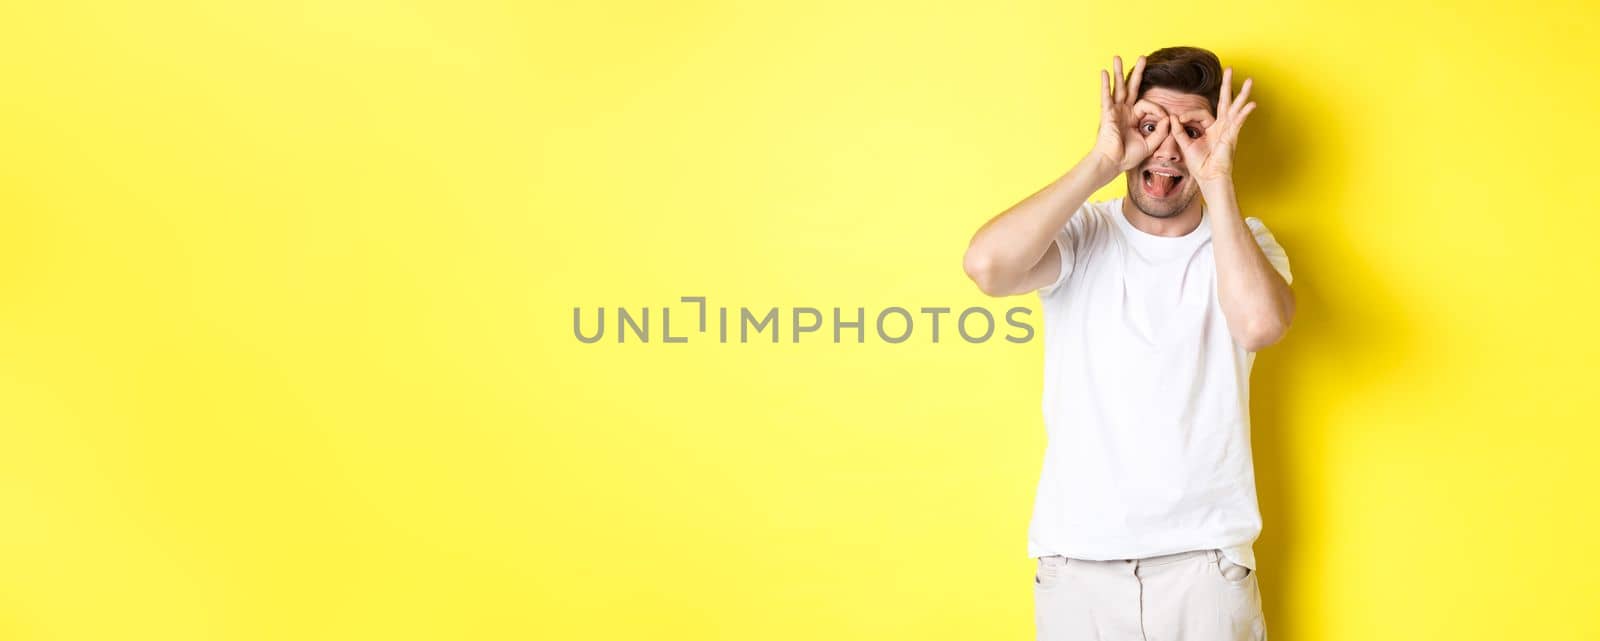 Young man showing funny faces and sticking tongue, standing playful against yellow background.